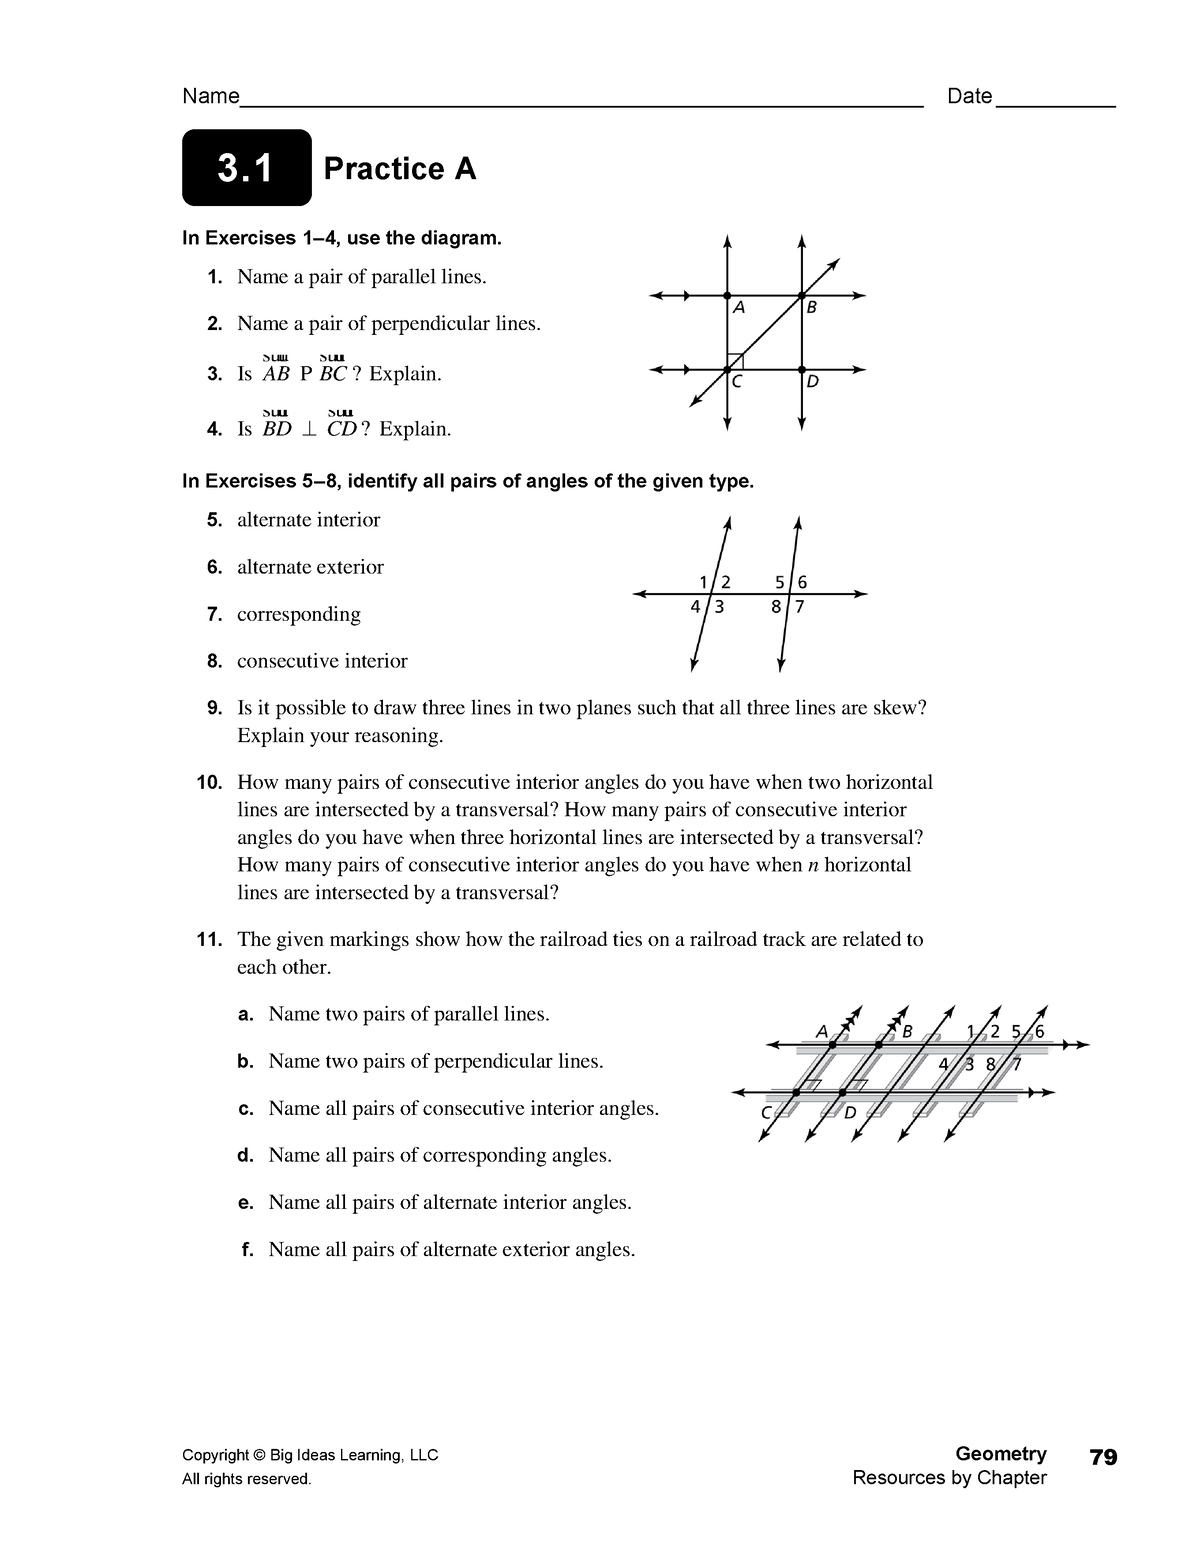 79 questions with answers in COMPLEX GEOMETRY